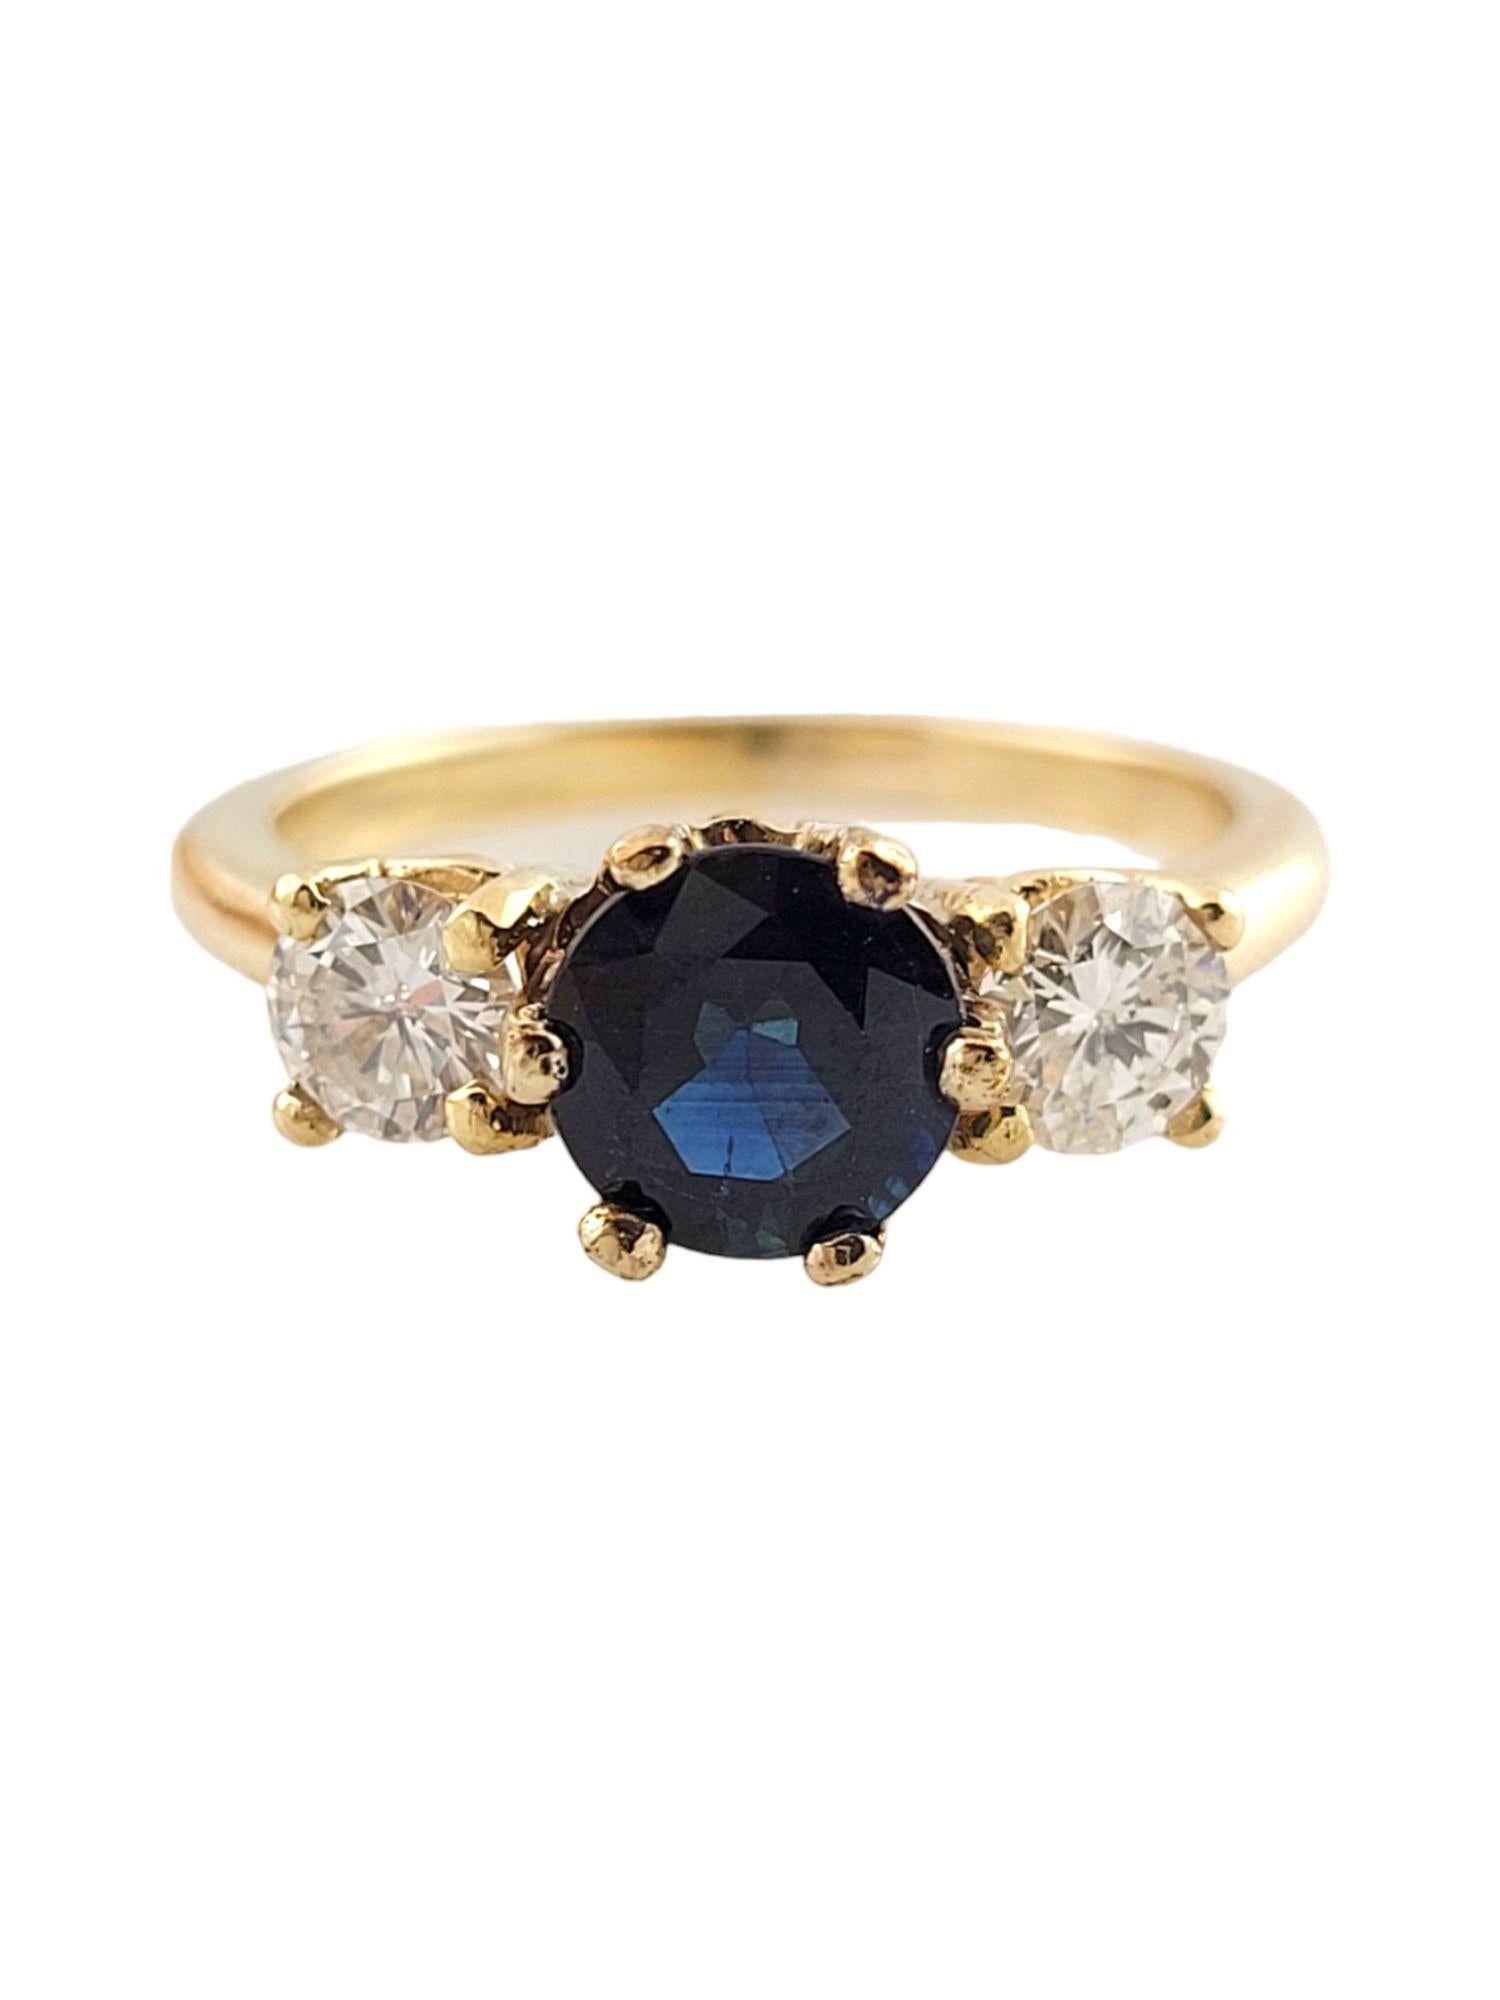 Vintage 14K Yellow Gold Diamond and Natural Sapphire Ring Size 4.75

This gorgeous sapphire and diamond ring is set with two round brilliant diamonds and one larger deep blue genuine sapphire.

Round brilliant diamonds are approximately .25 carats